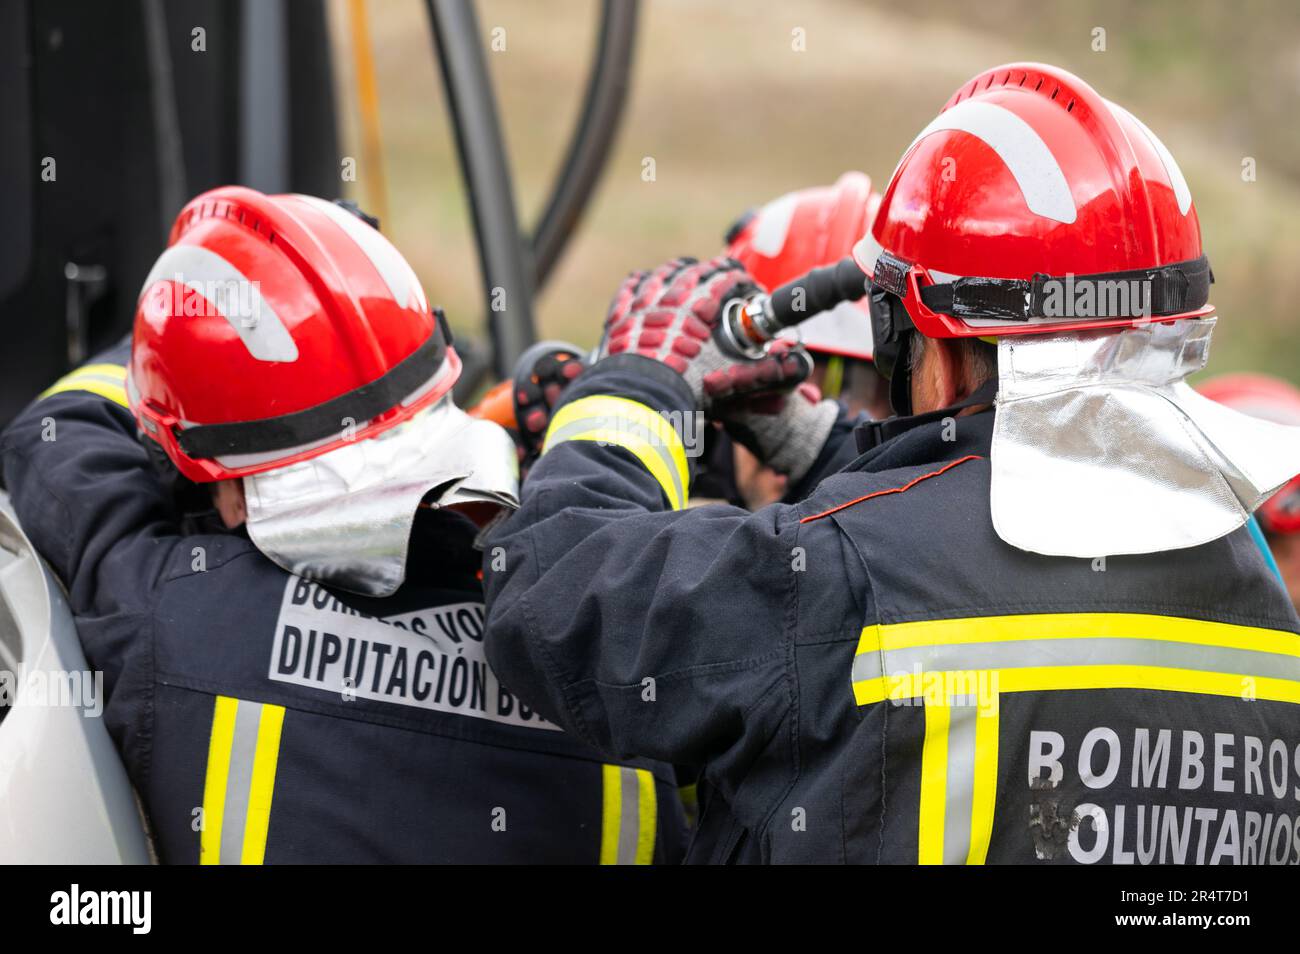 Firefighters using hydraulic tools during a rescue operation training. Rescuers unlock the passenger in car after accident. High quality photography. Stock Photo